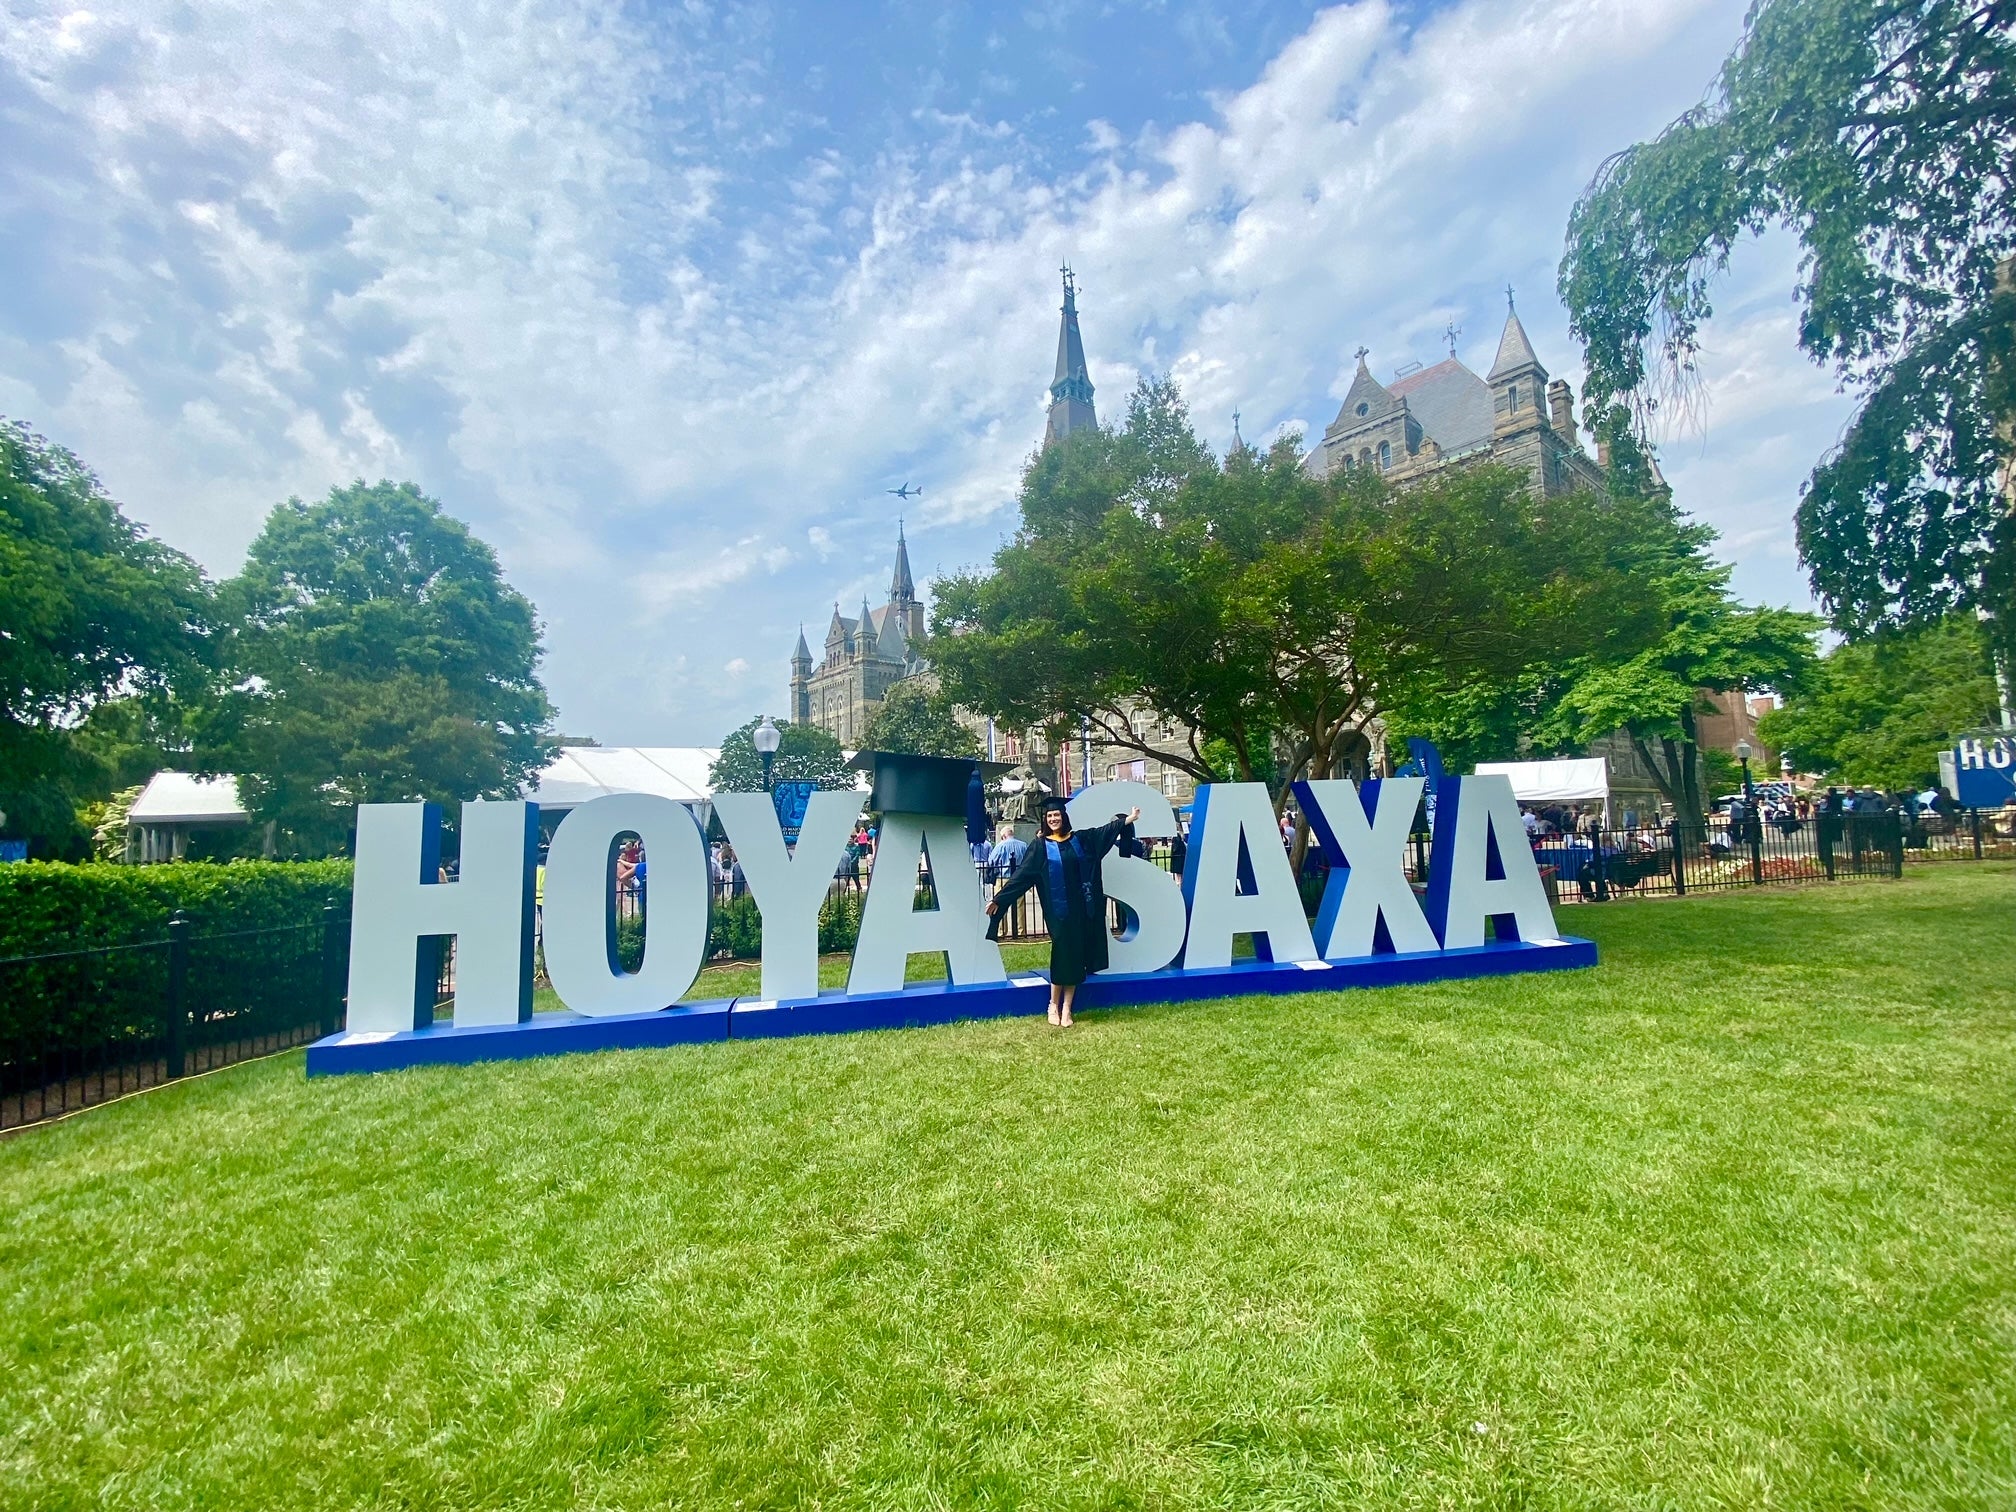 DSAN Graduate standing in front of the HOYA SAXA sign on the Healy Lawn